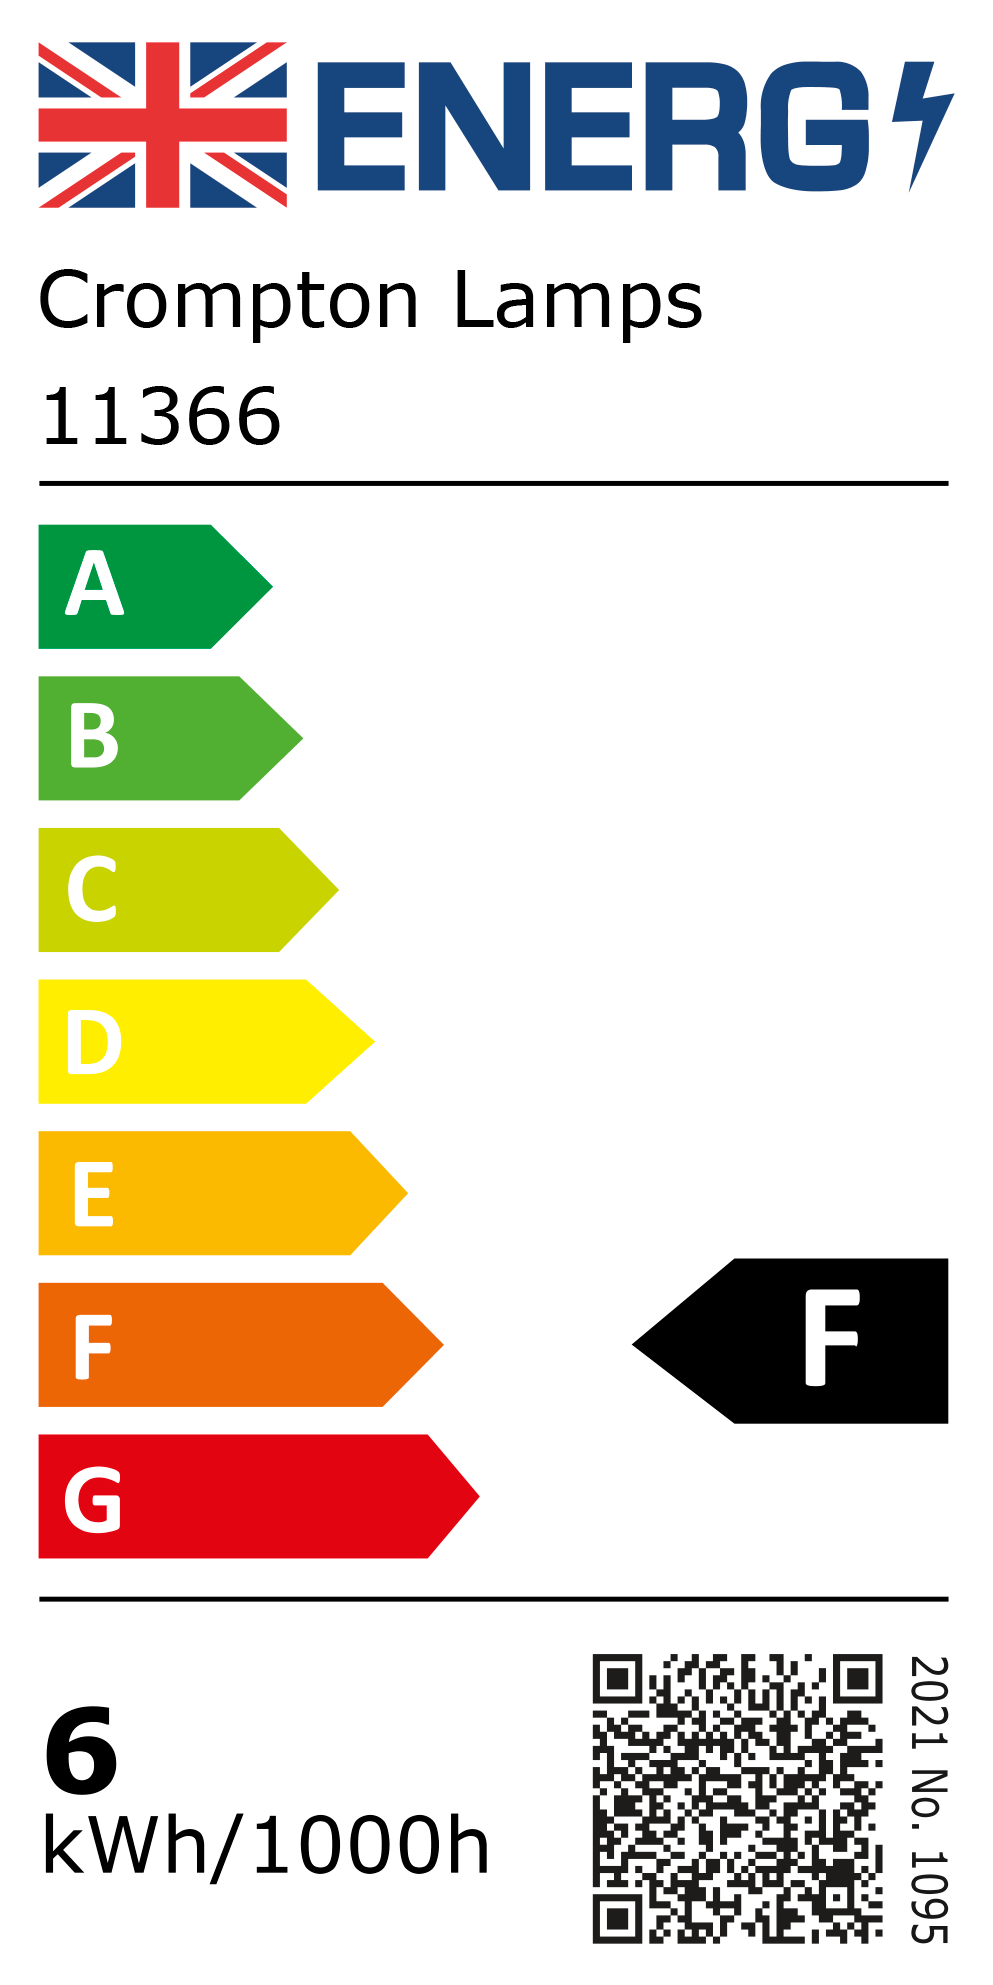 New 2021 Energy Rating Label: Stock Code 11366